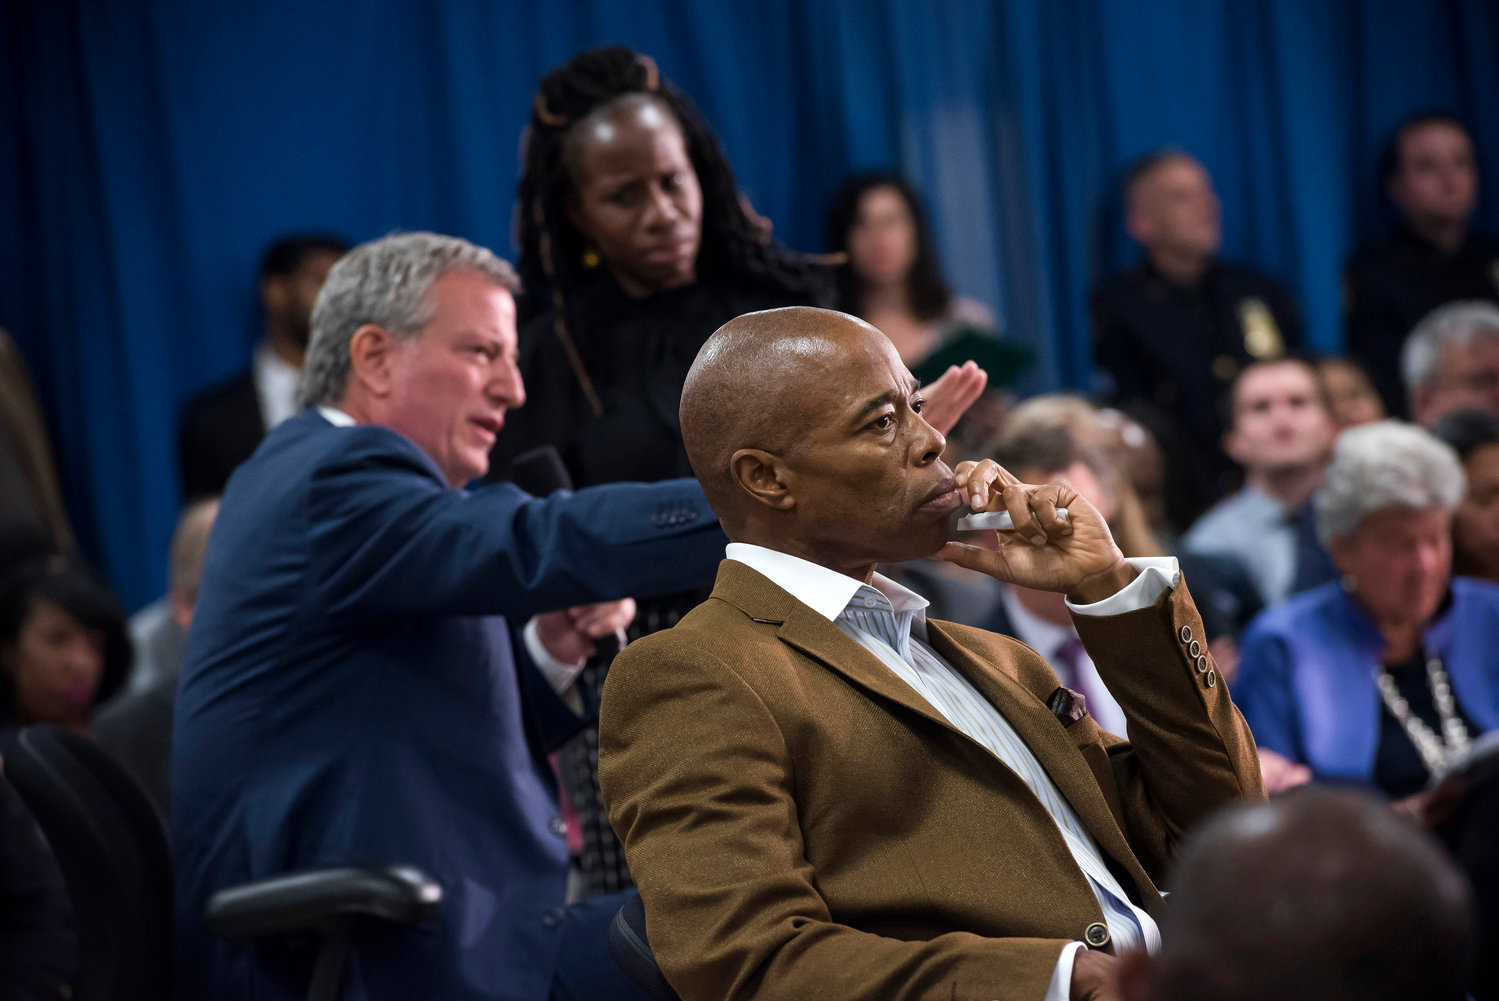 Brooklyn borough president Eric Adams will very likely be the city’s next mayor, after narrowly beating former sanitation commissioner Kathryn Garcia in an intense Democratic primary. Adams will face off against Republican Curtis Sliwa in November, but has little chance of losing.